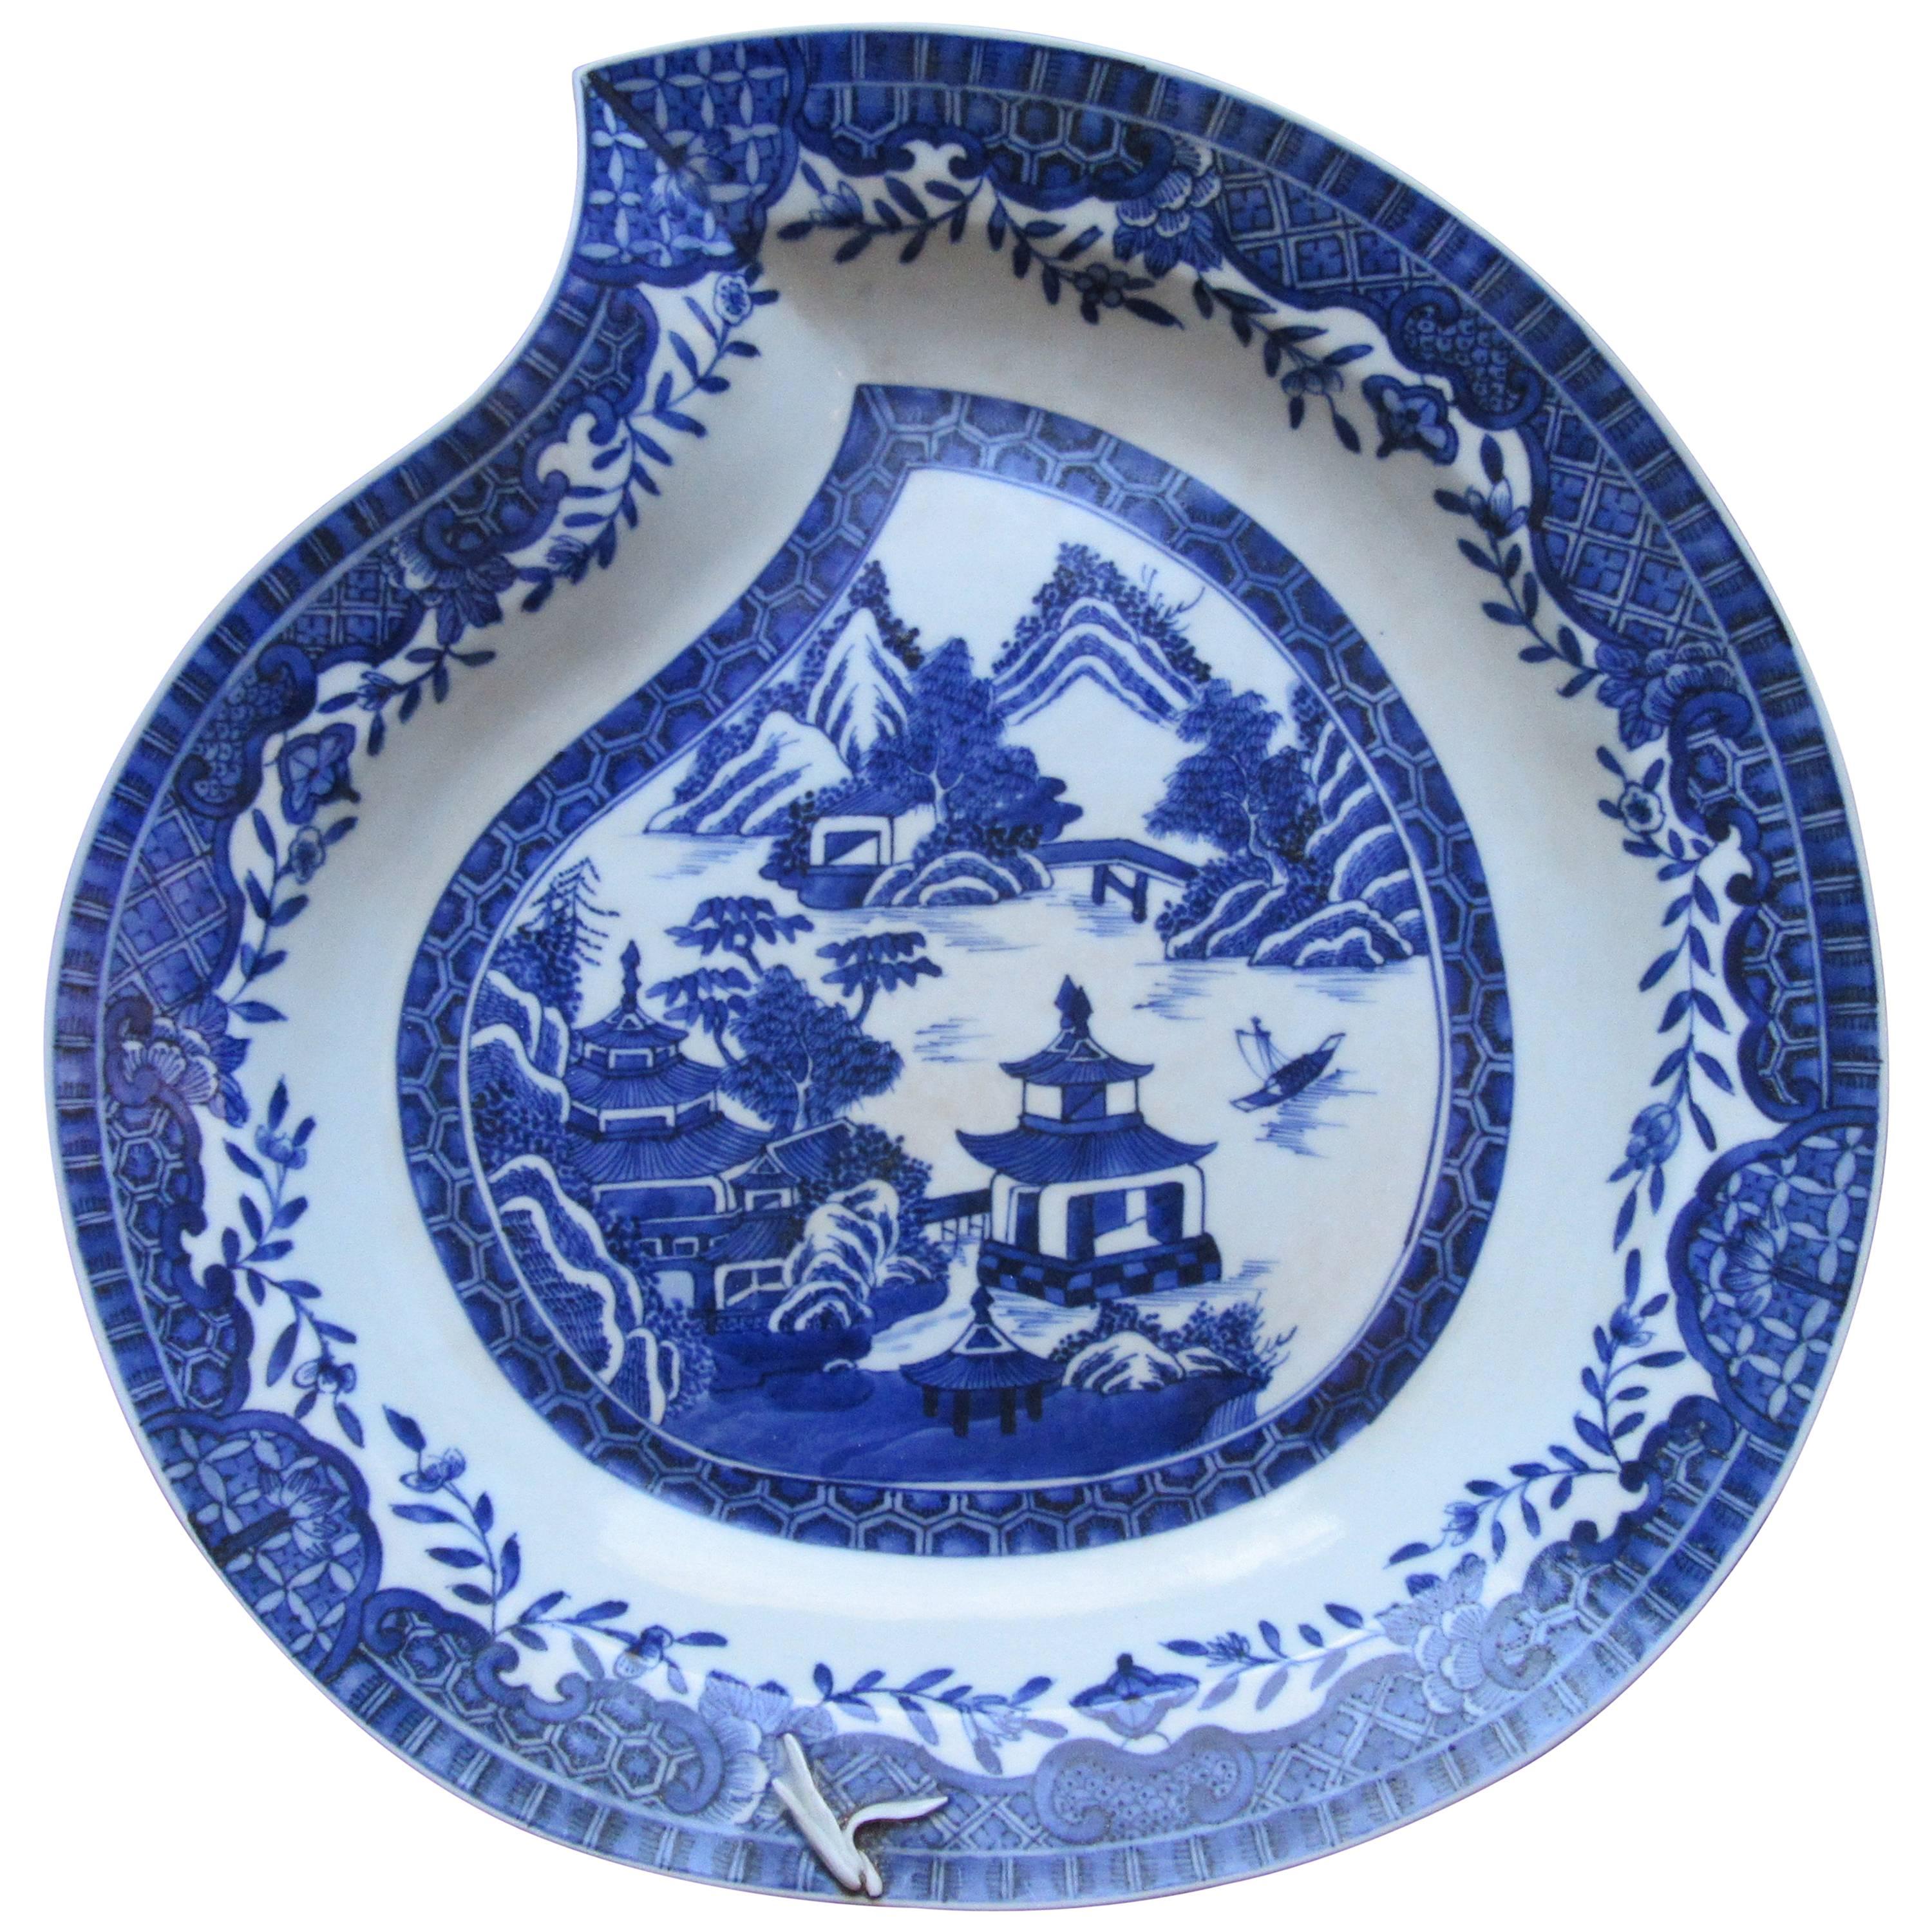 Peach Shaped Chinese Blue and White Porcelain Charger